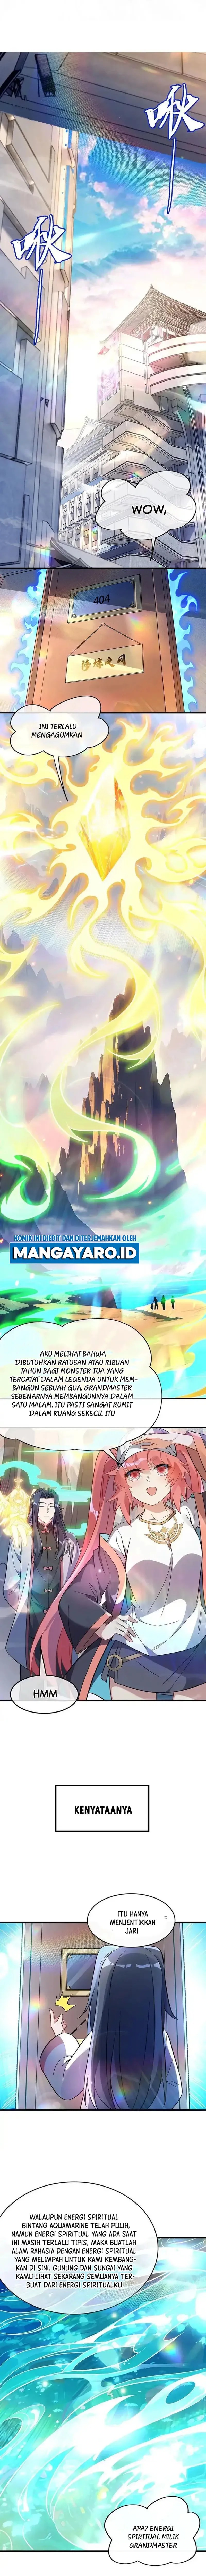 Dilarang COPAS - situs resmi www.mangacanblog.com - Komik my female apprentices are all big shots from the future 268 - chapter 268 269 Indonesia my female apprentices are all big shots from the future 268 - chapter 268 Terbaru 1|Baca Manga Komik Indonesia|Mangacan